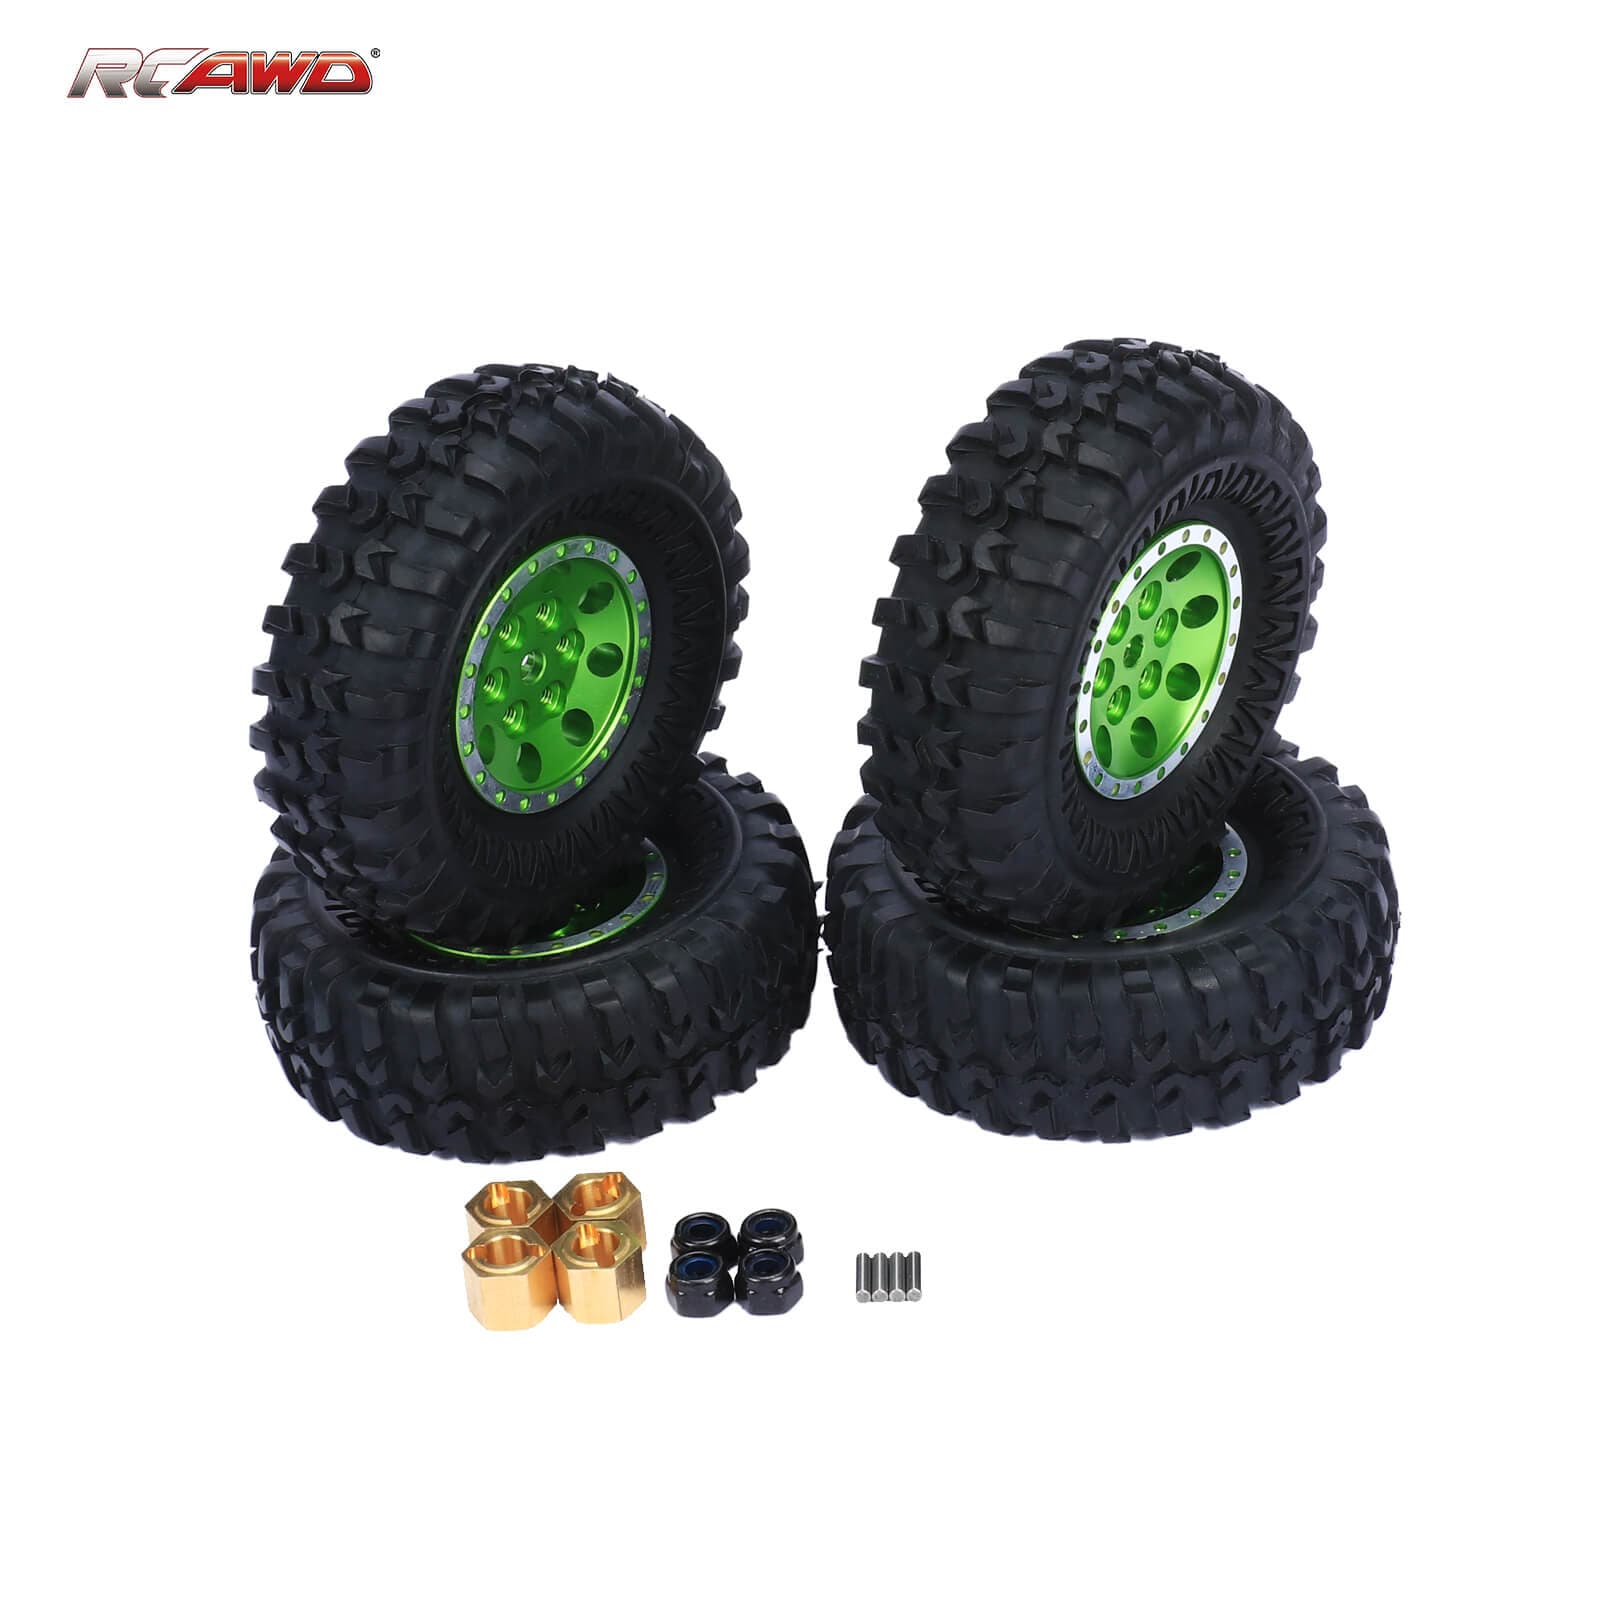 RCAWD FMS FCX24 RCAWD FCX24 55*20mm 8 spokes wheel Tires with 7mm brass wheel hex 4pcs